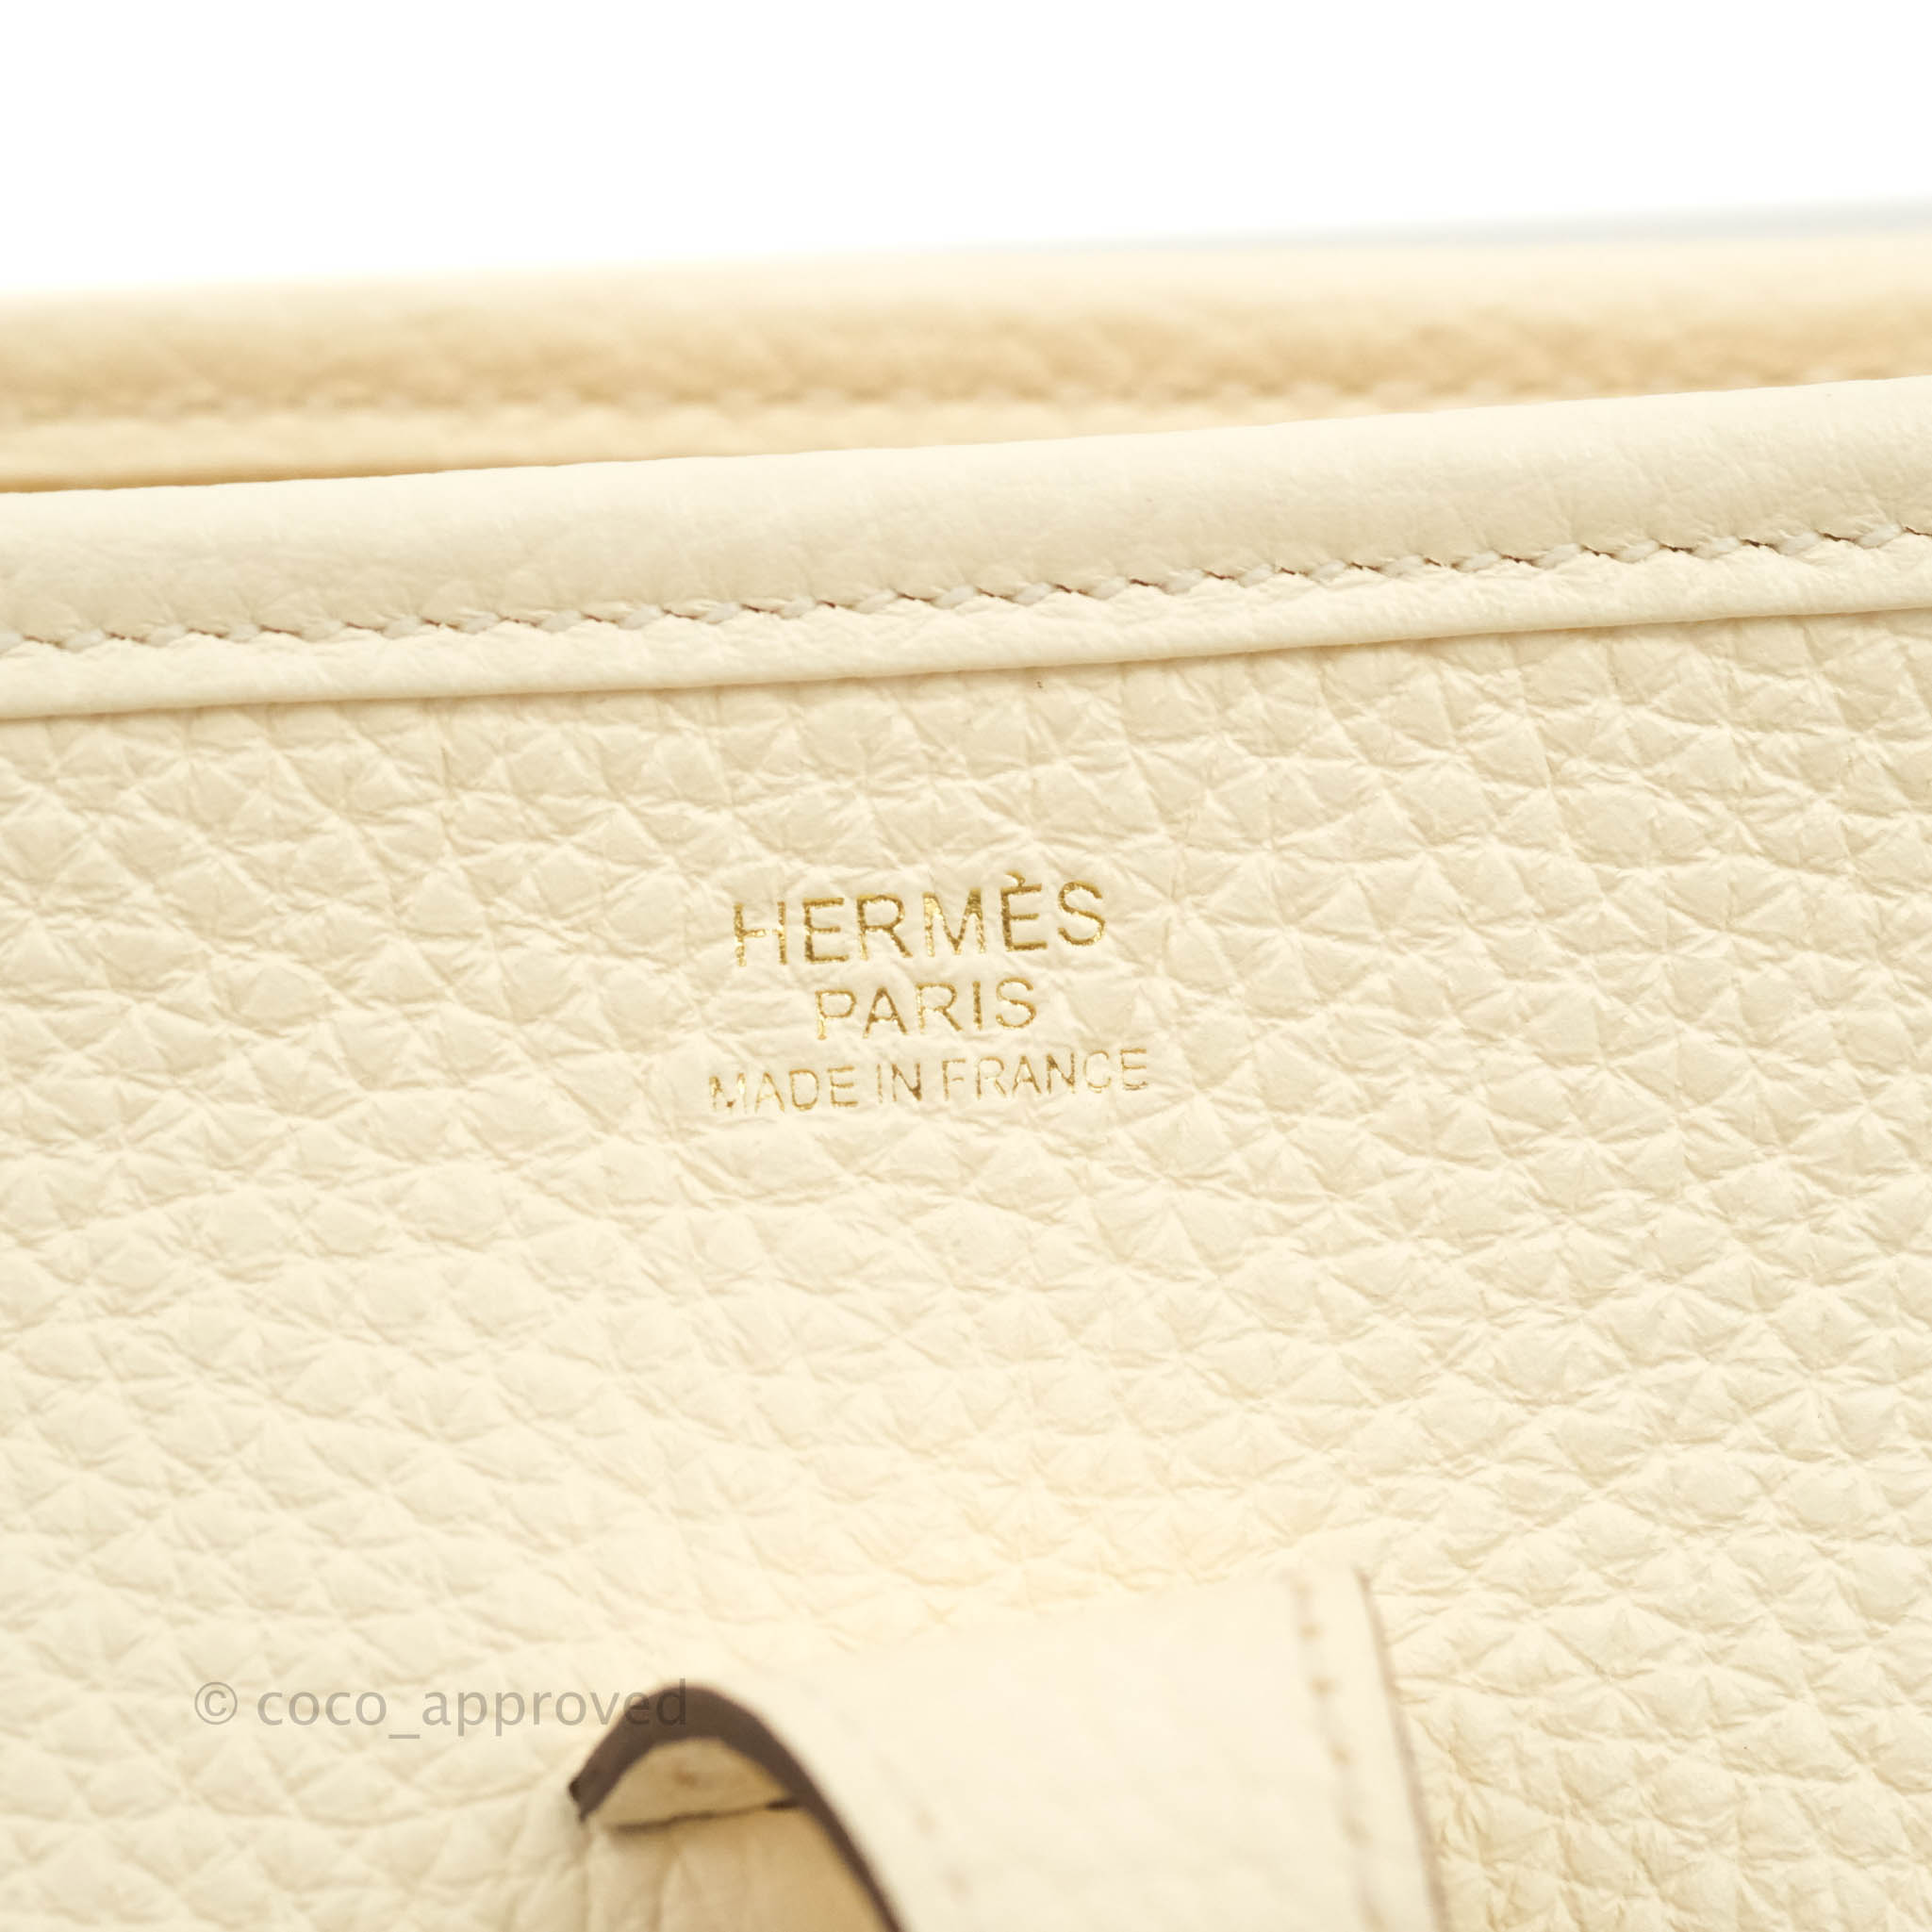 Hermès Evelyne Tpm In New White Taurillon Clemence e With Gold  Hardware